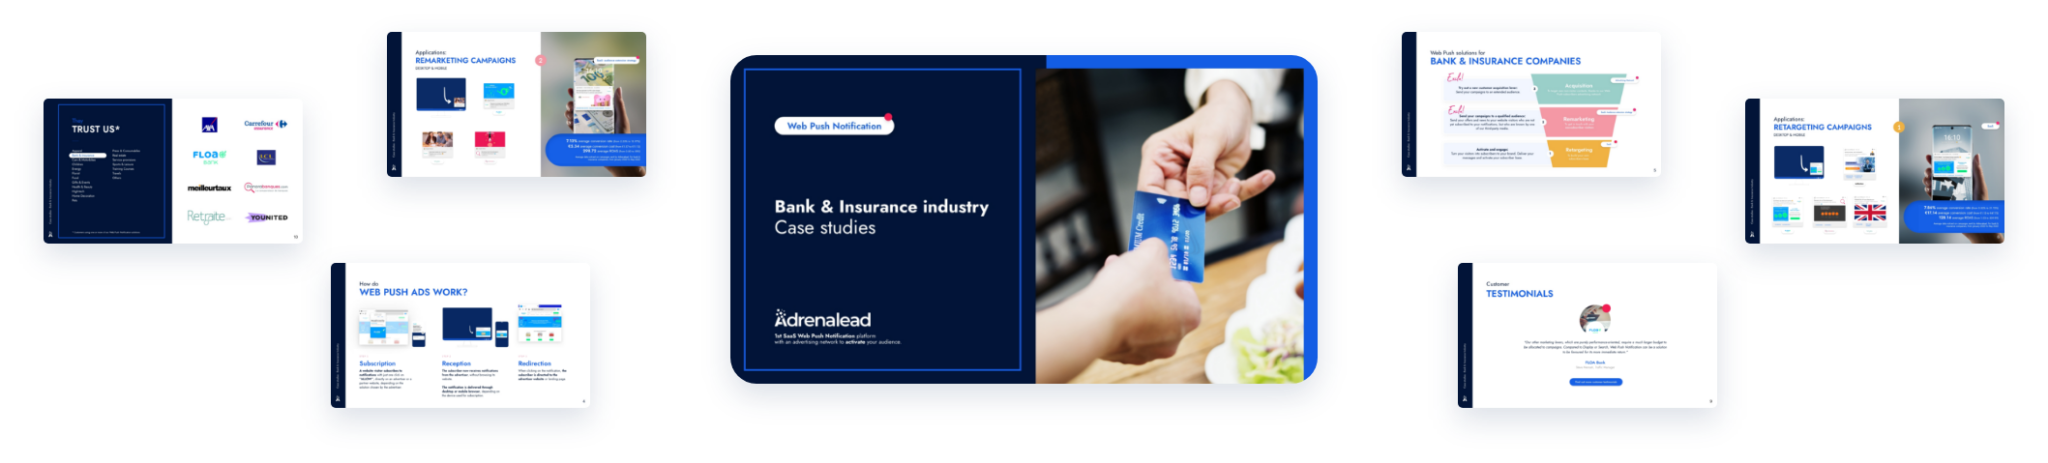 Acquisition loyalty banking insurance use case